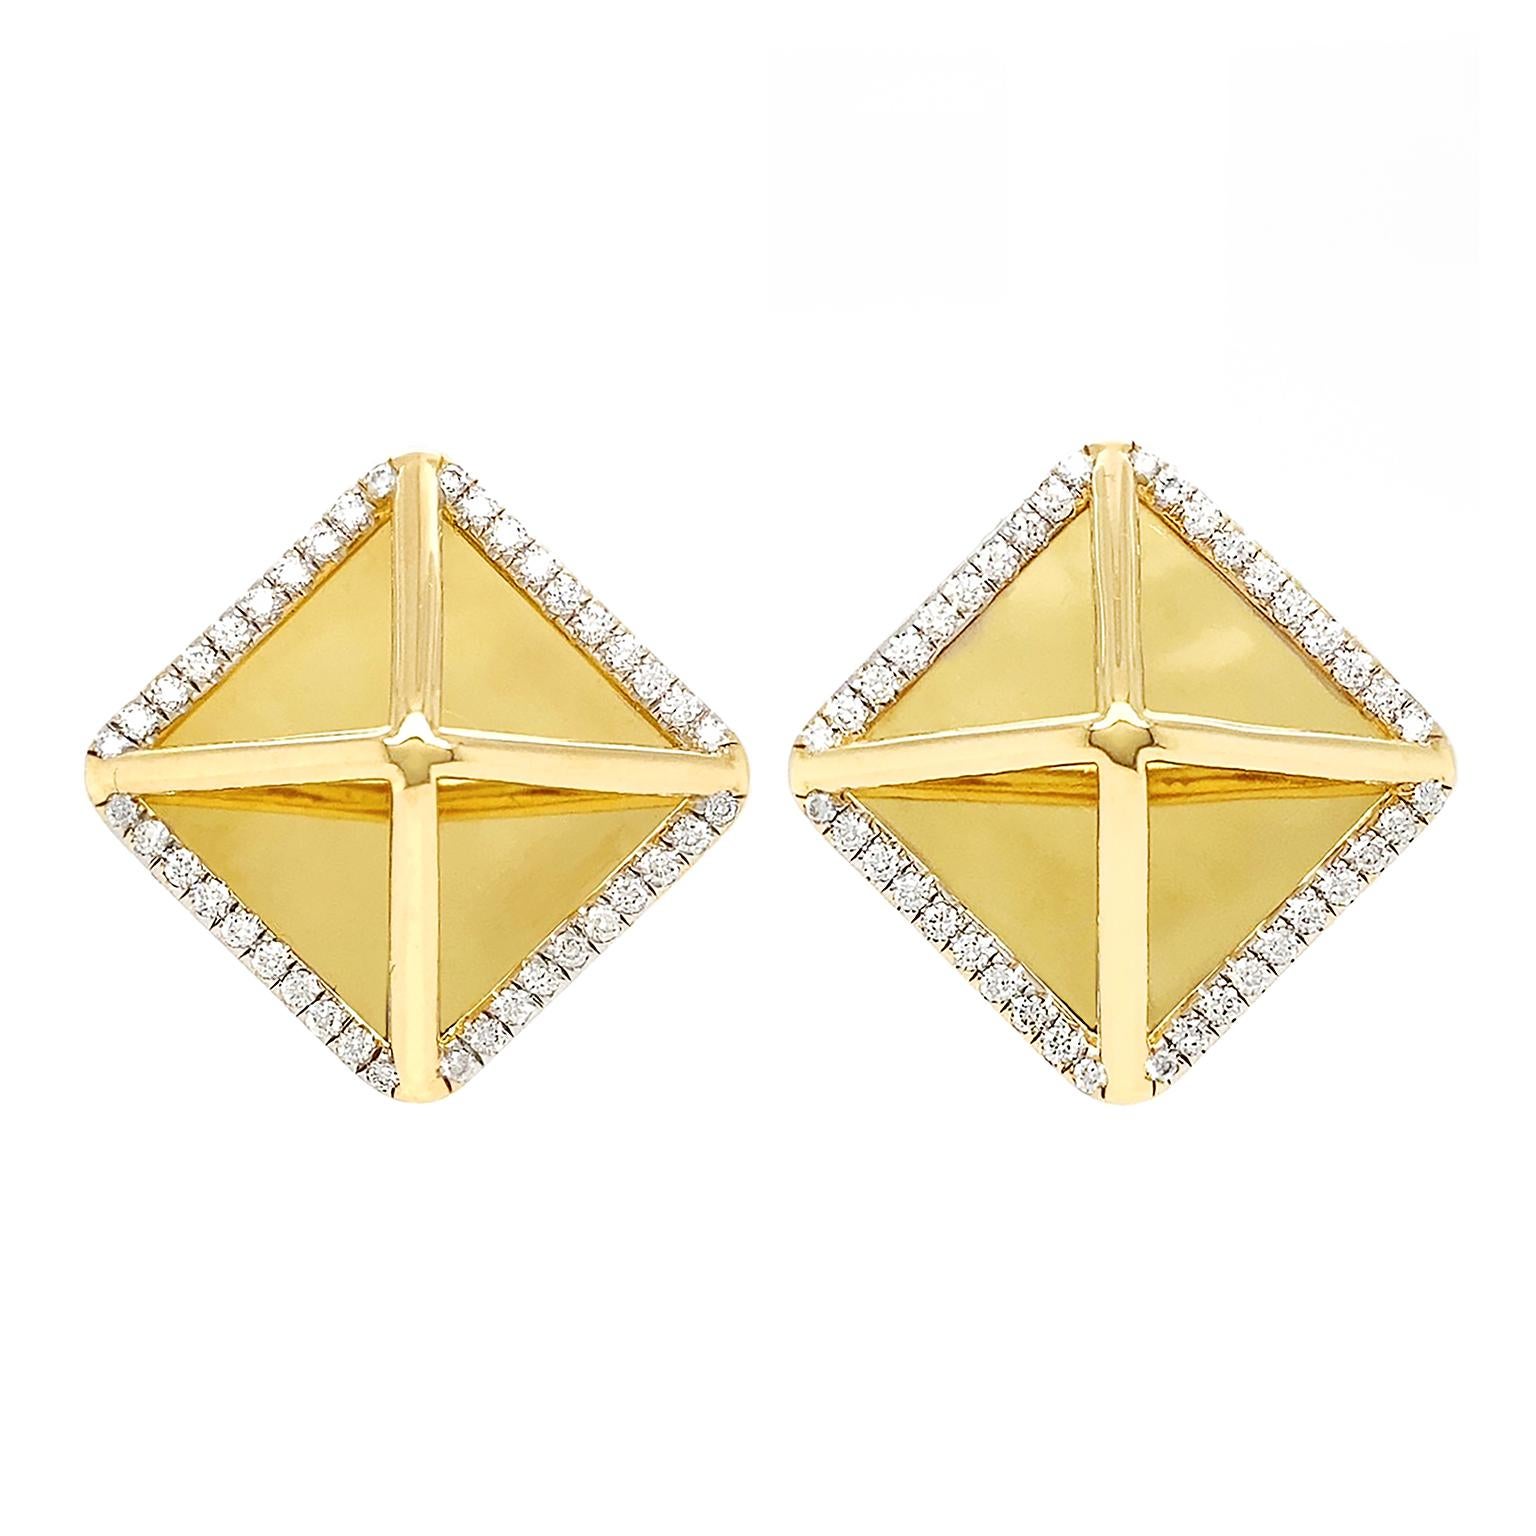 18K Yellow Gold Pyramid Diamond Earrings In New Condition For Sale In New York, NY